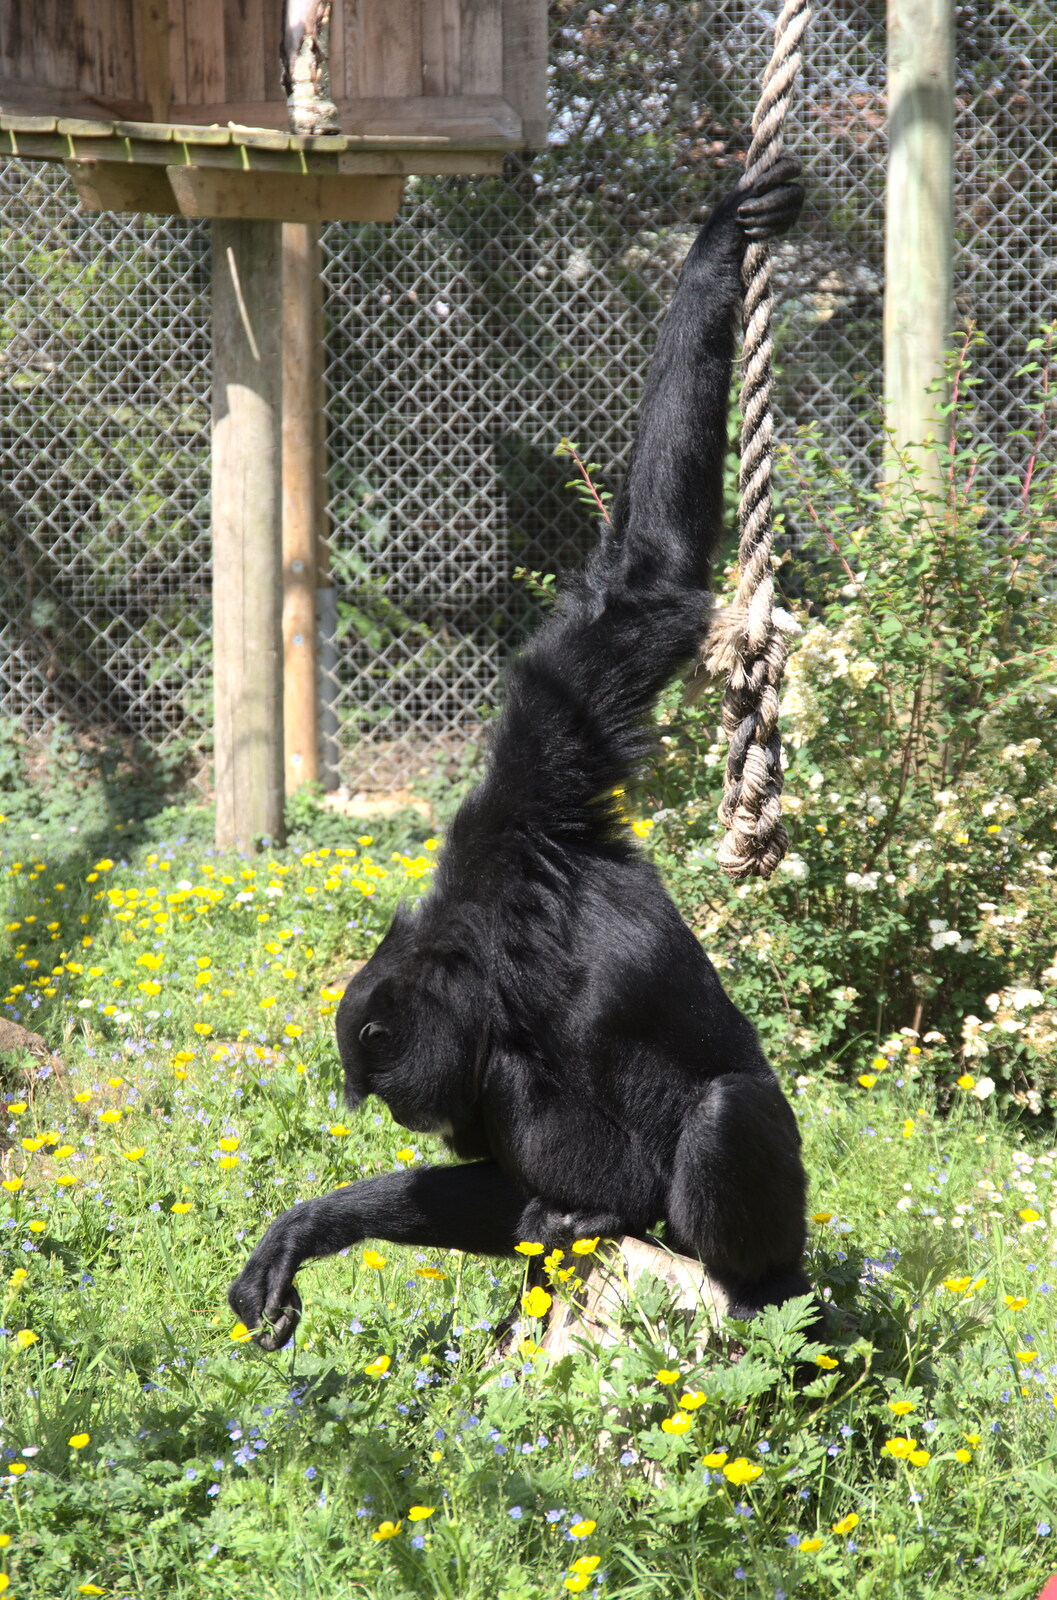 A gibbon picks at some flowers from A Moth Infestation and a Trip to the Zoo, Banham, Norfolk - 21st May 2022